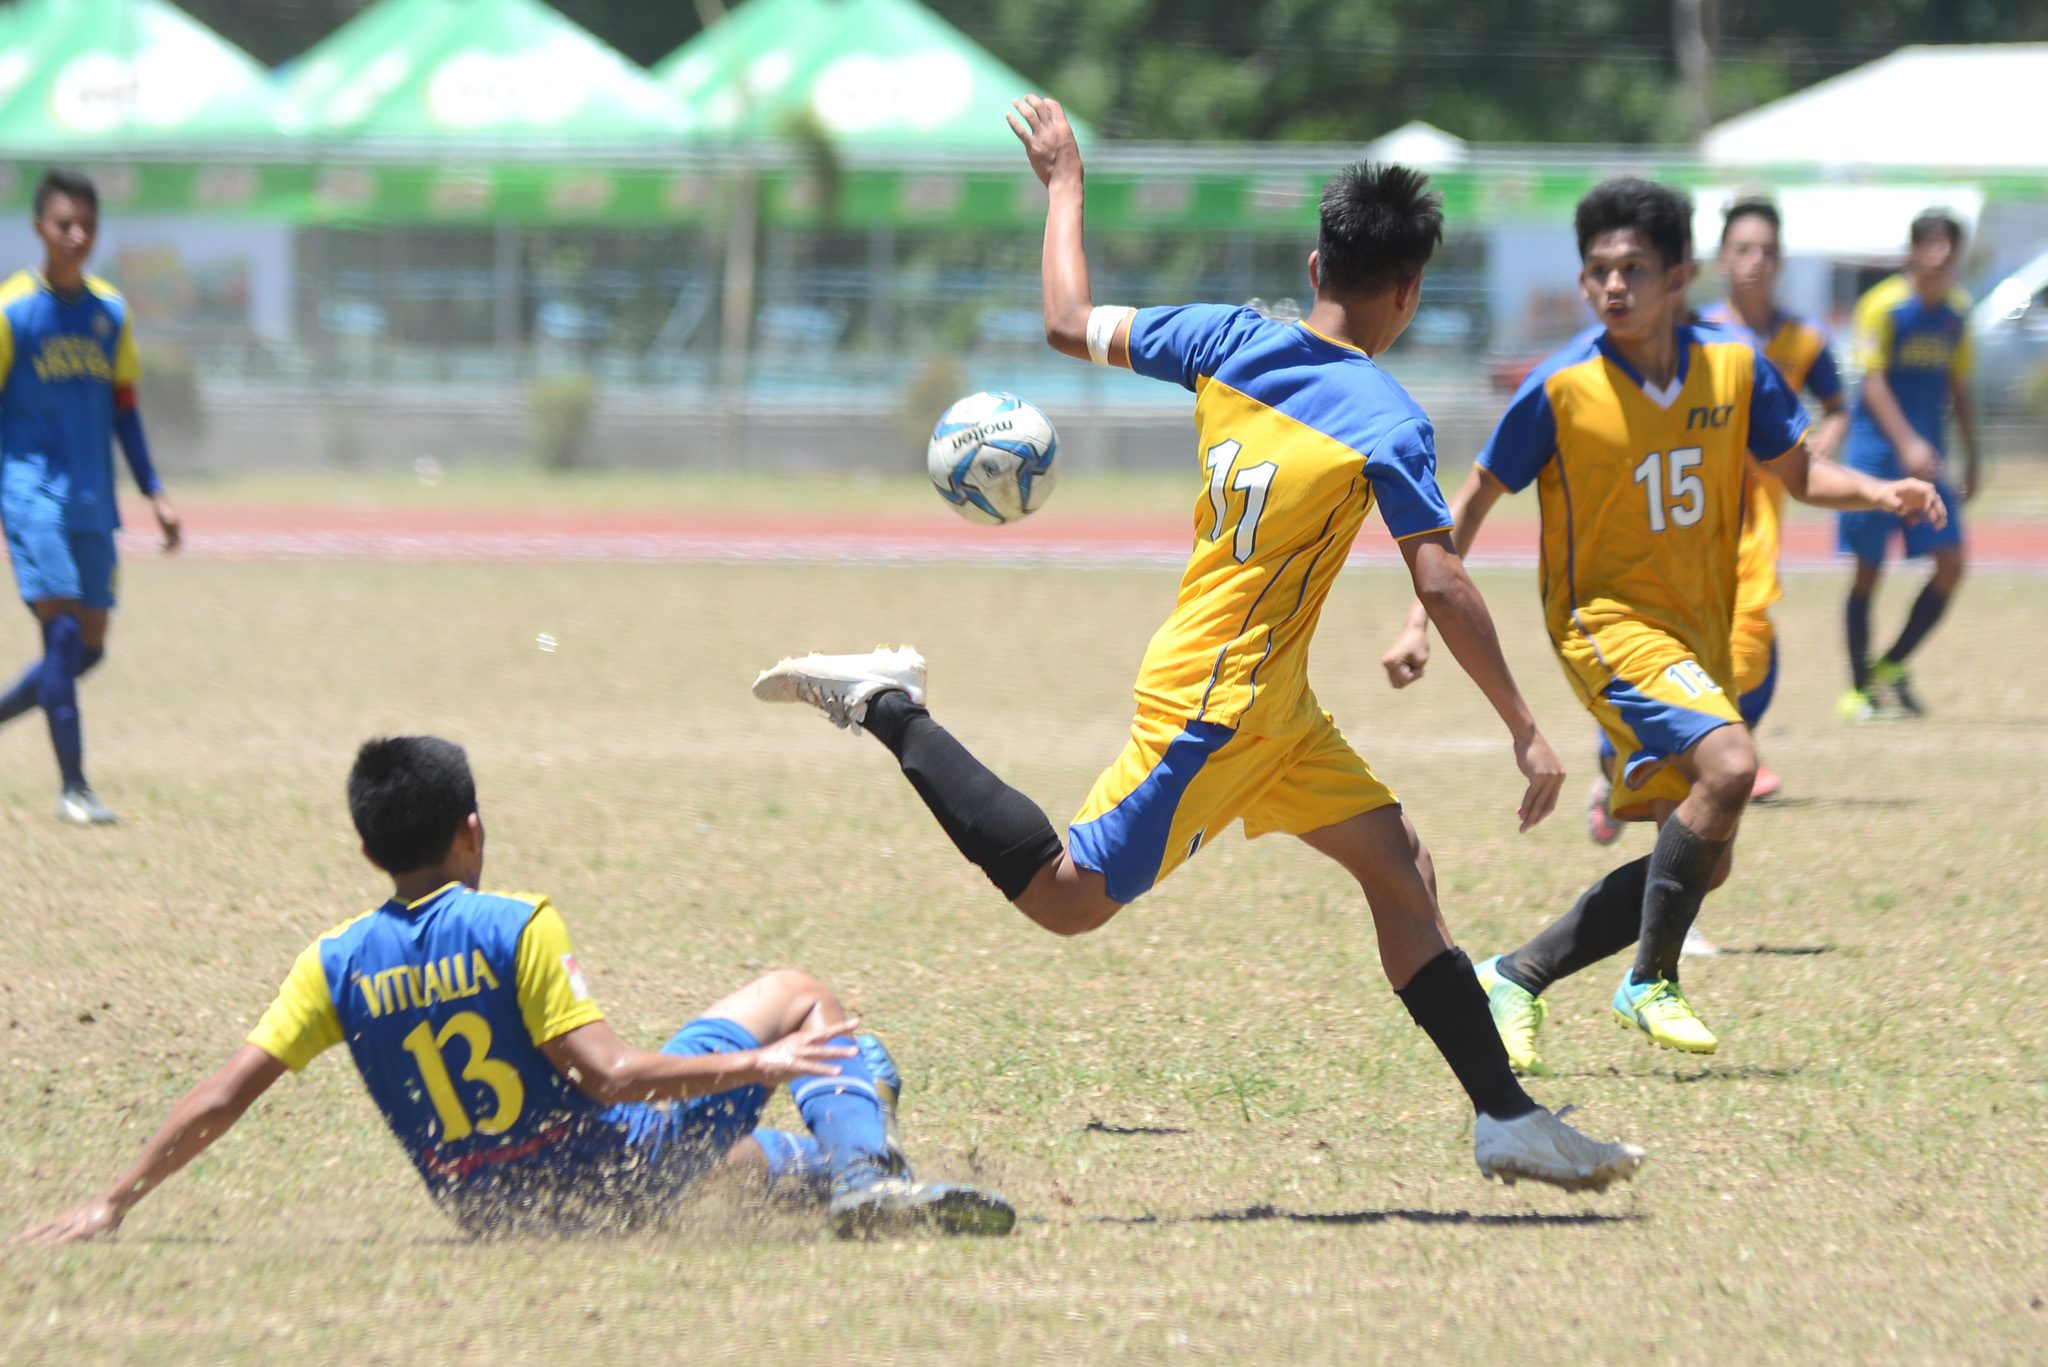 HEATED FINAL. NCR emerges victorious after a scuffled-filled football final against Central Visayas at Palaro 2016. Photo by Roy Secretario/Rappler 